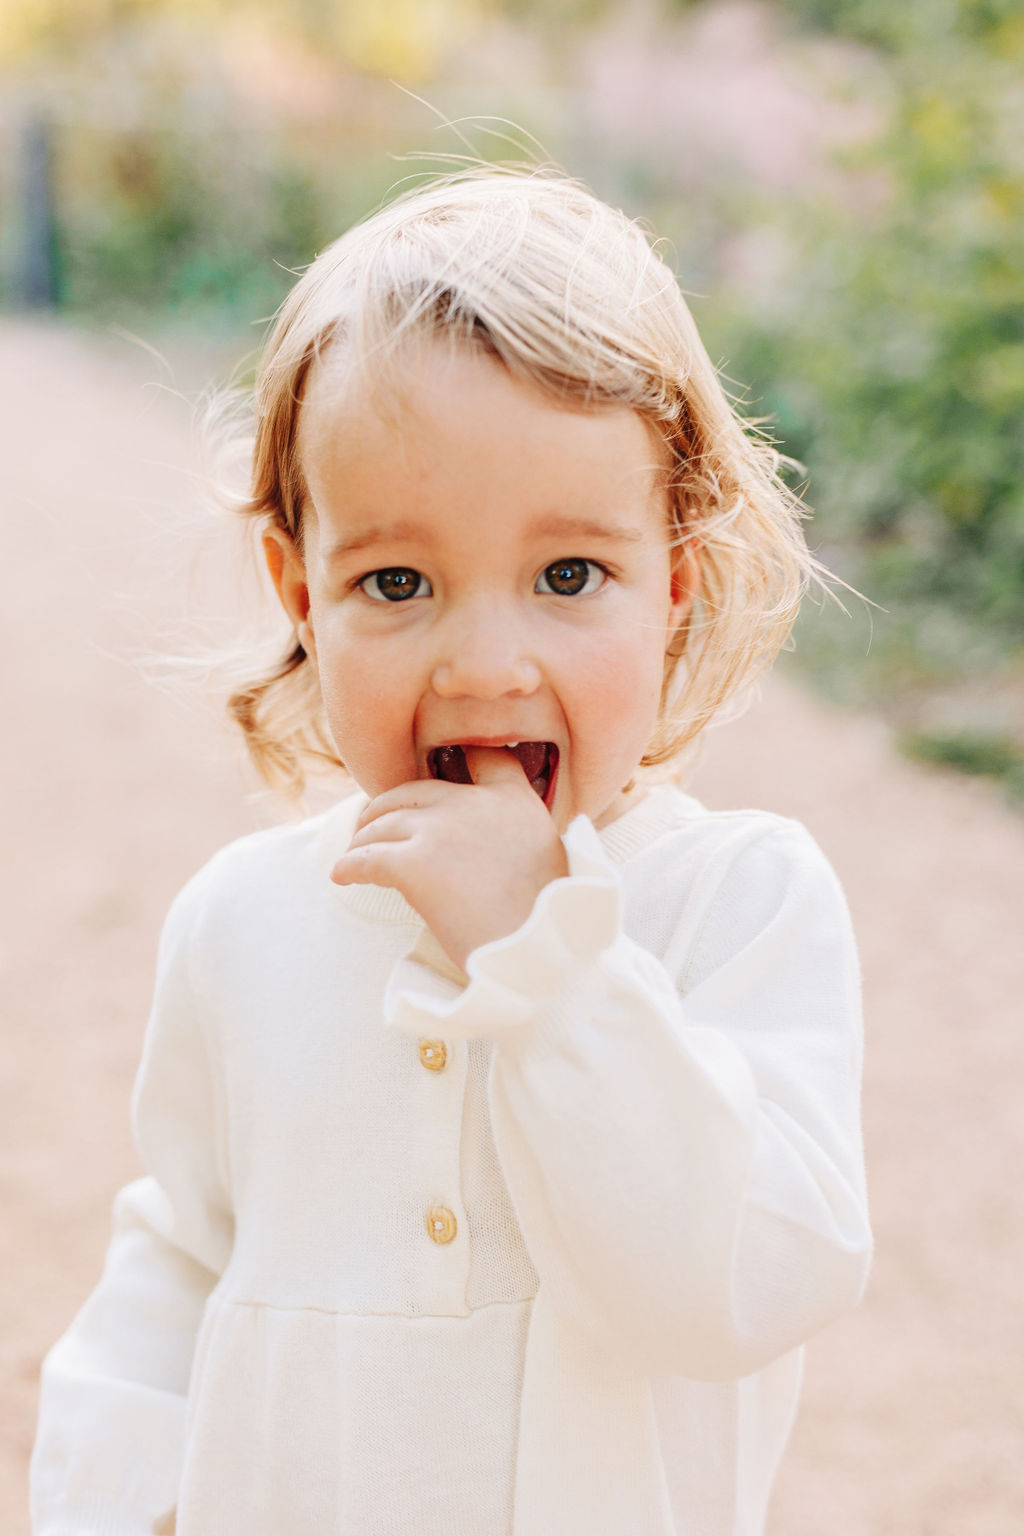 A young toddler girl stands in a park path with a finger in her open mouth during things to do in houston with toddlers